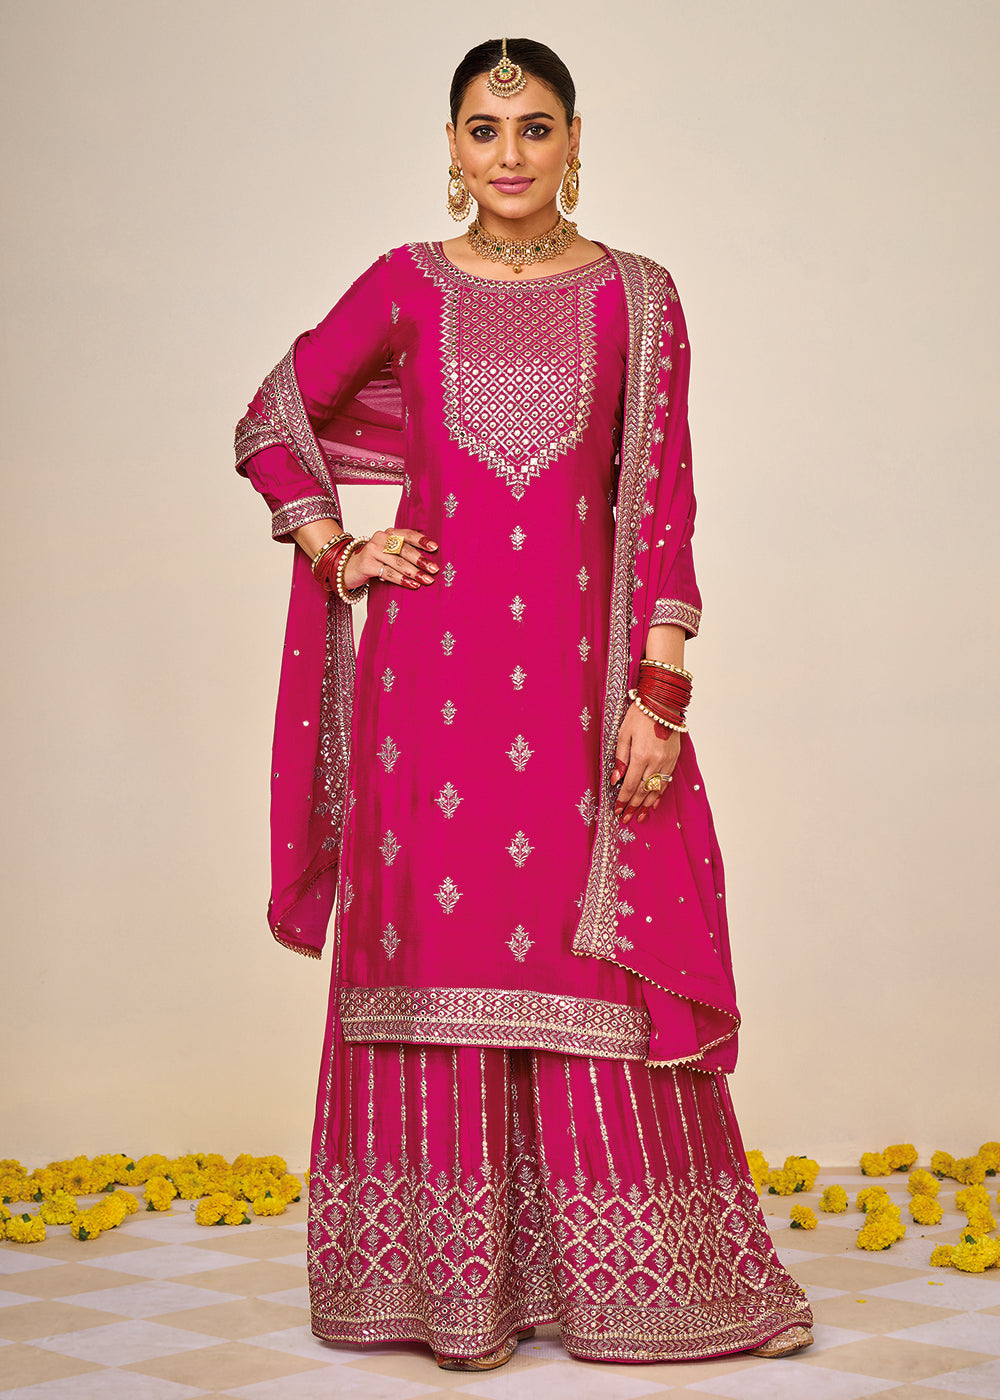 Buy Now Wedding Festival Pink Embroidered Palazzo Salwar Suit Online in USA, UK, Canada & Worldwide at Empress Clothing.